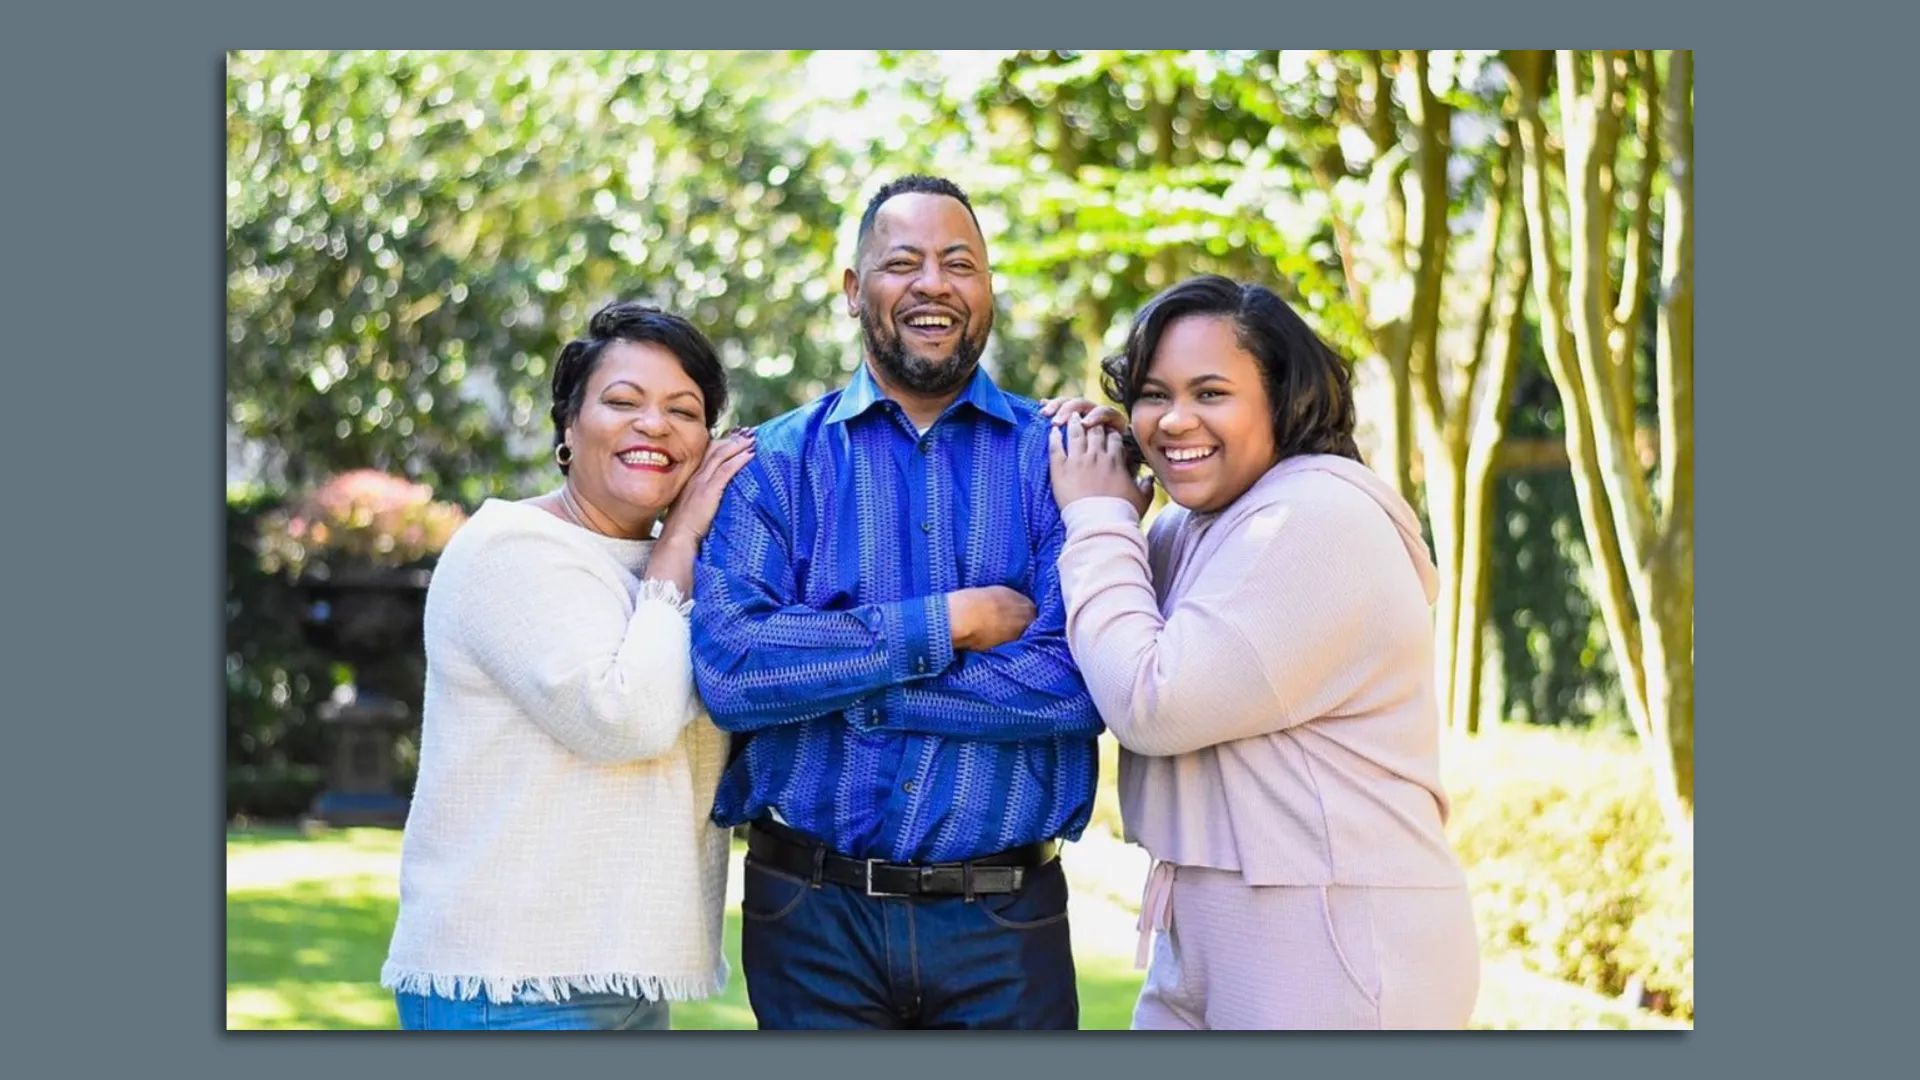 Photo shows LaToya Cantrell, husband Jason and daughter RayAnn smiling outside.